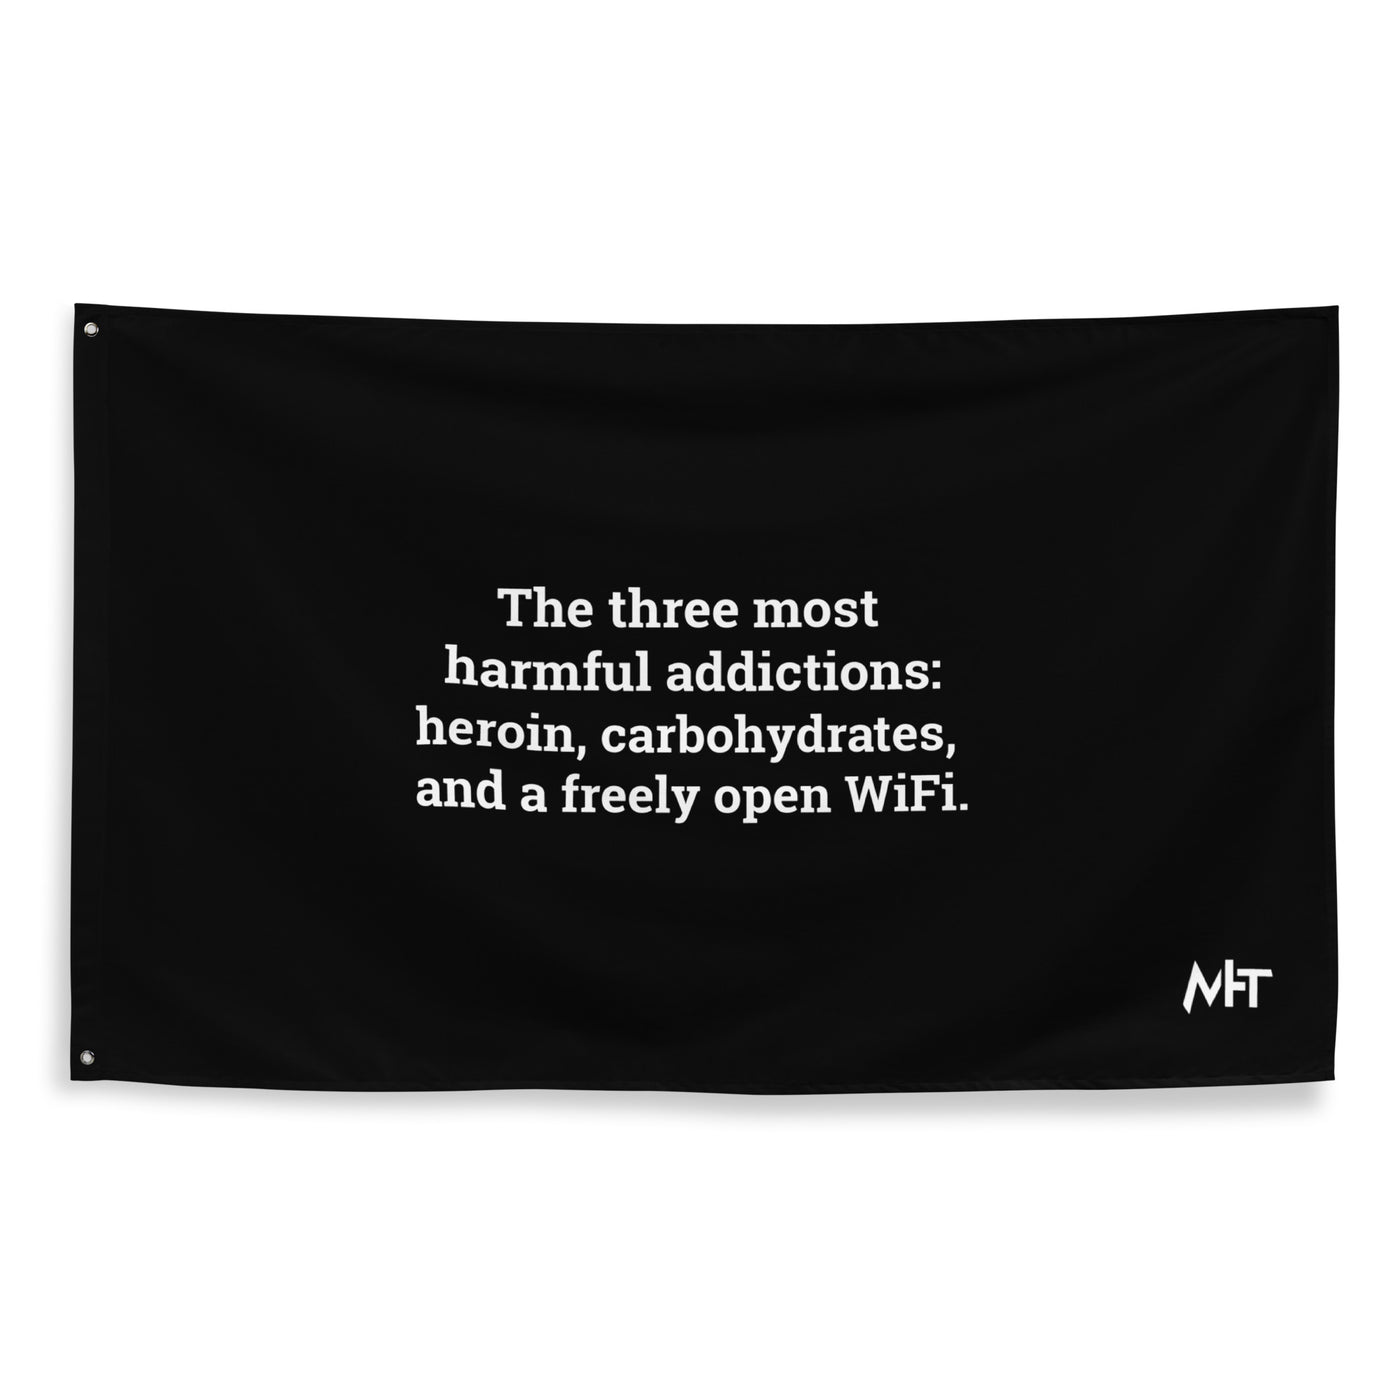 The three most harmful addictions heroin, carbohydrates and a freely open WiFi V1 - Flag